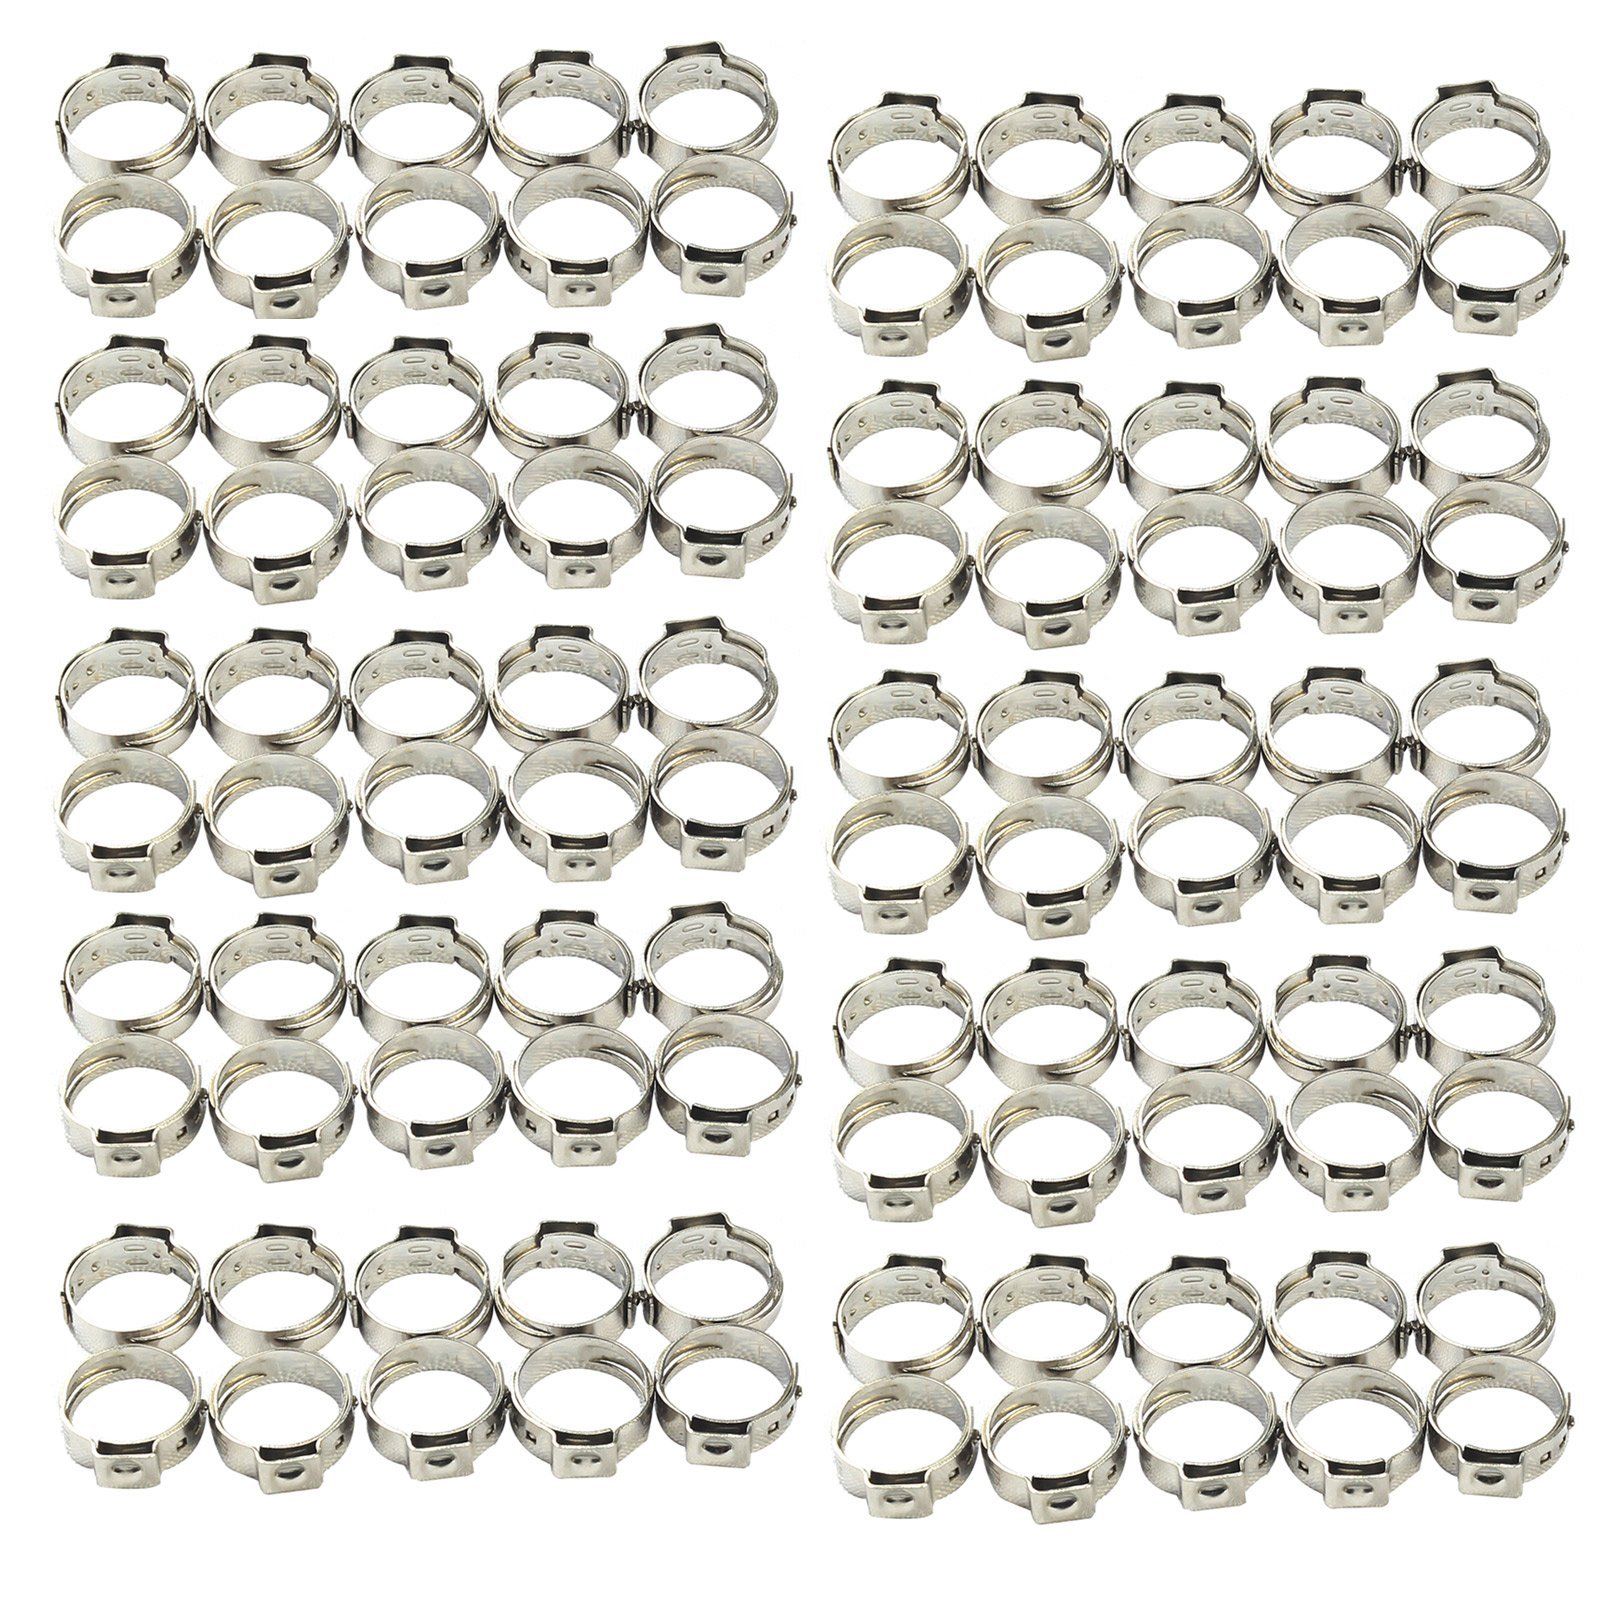 100 Pieces / Bag Stainless Steel 1/2 PEX Clamp Ring Crimping Ring Accessories Silver ZopiStyle